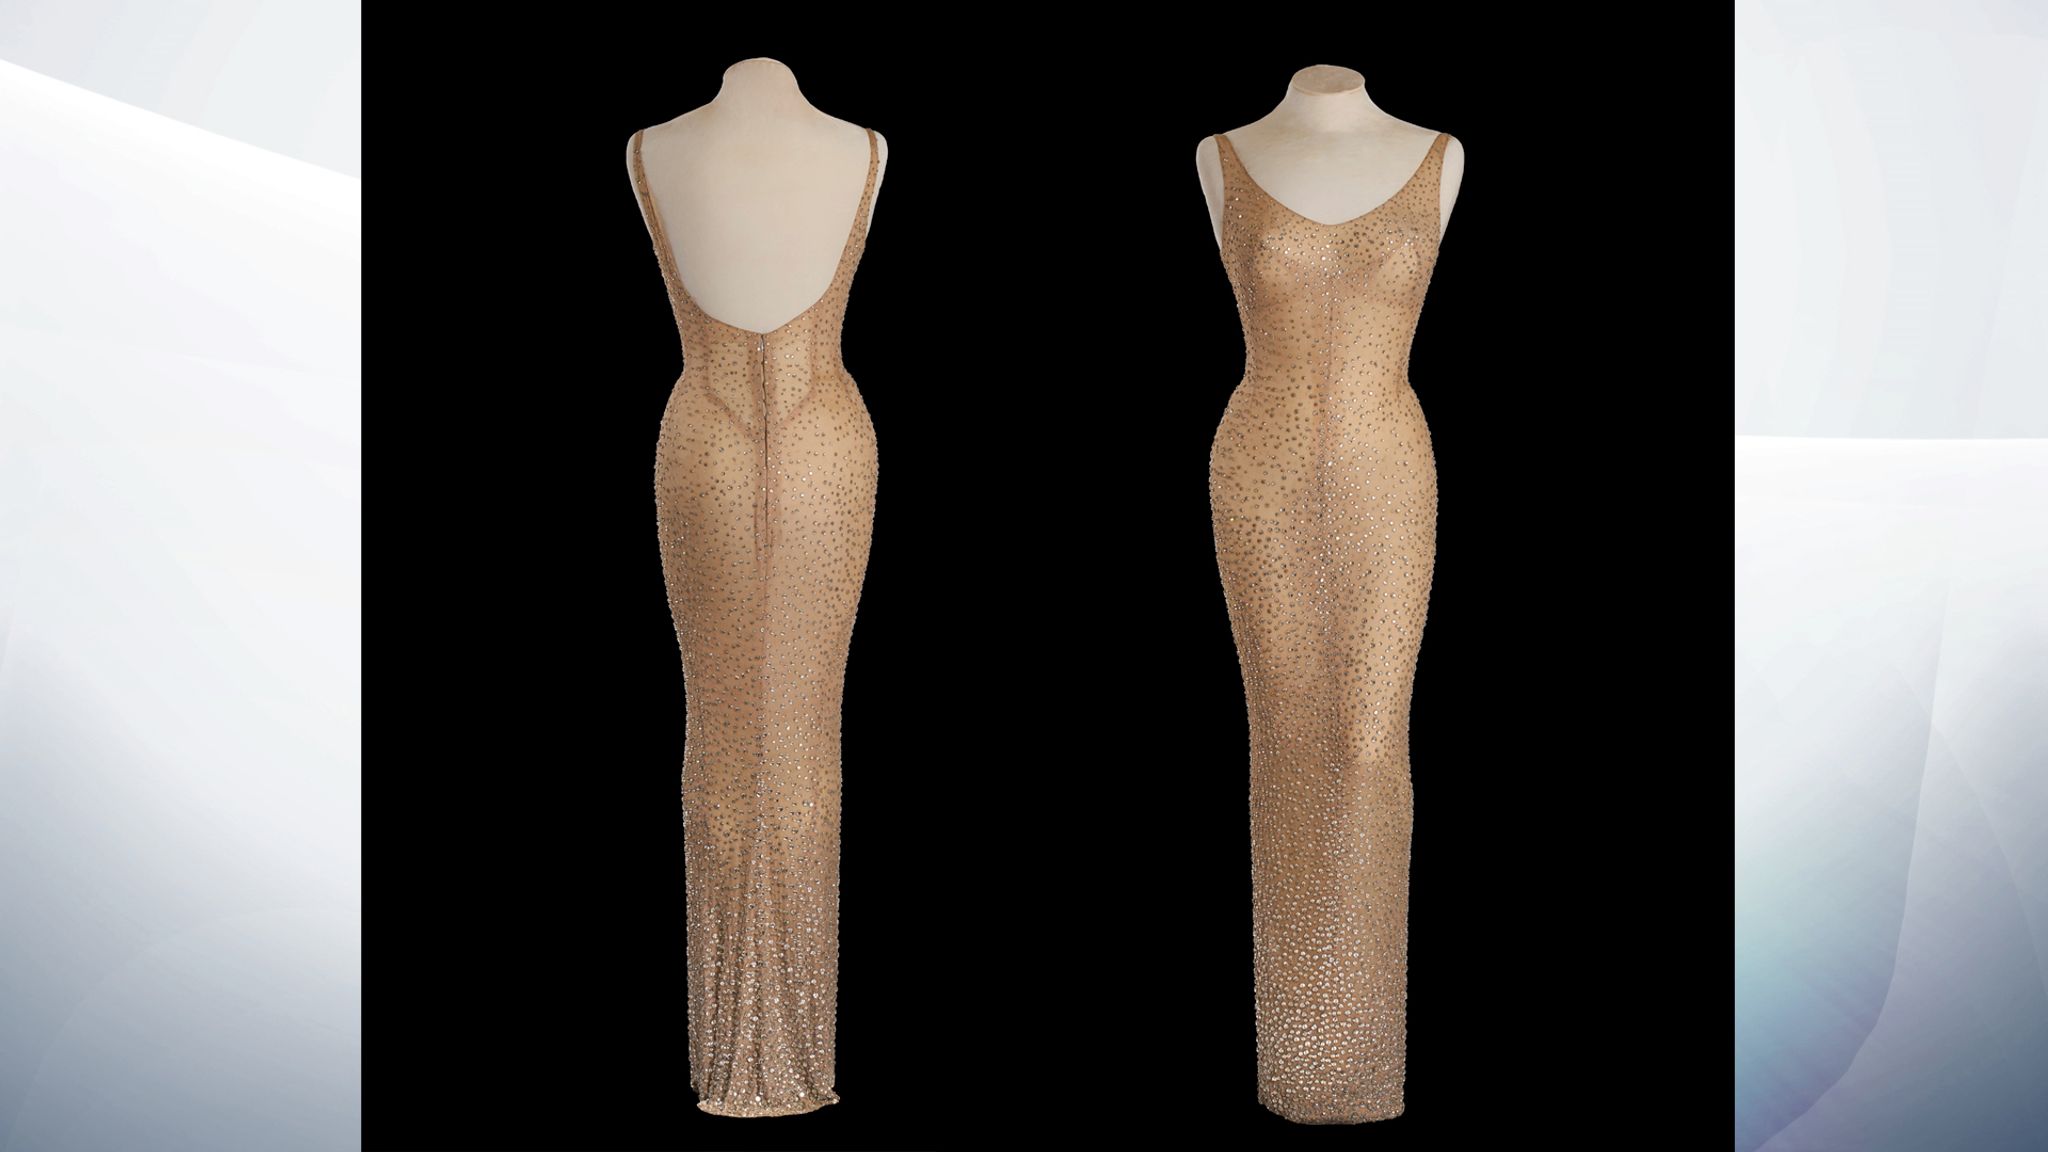 Marilyn Monroe's Happy Birthday dress sold for $4.8m | Ents & Arts News